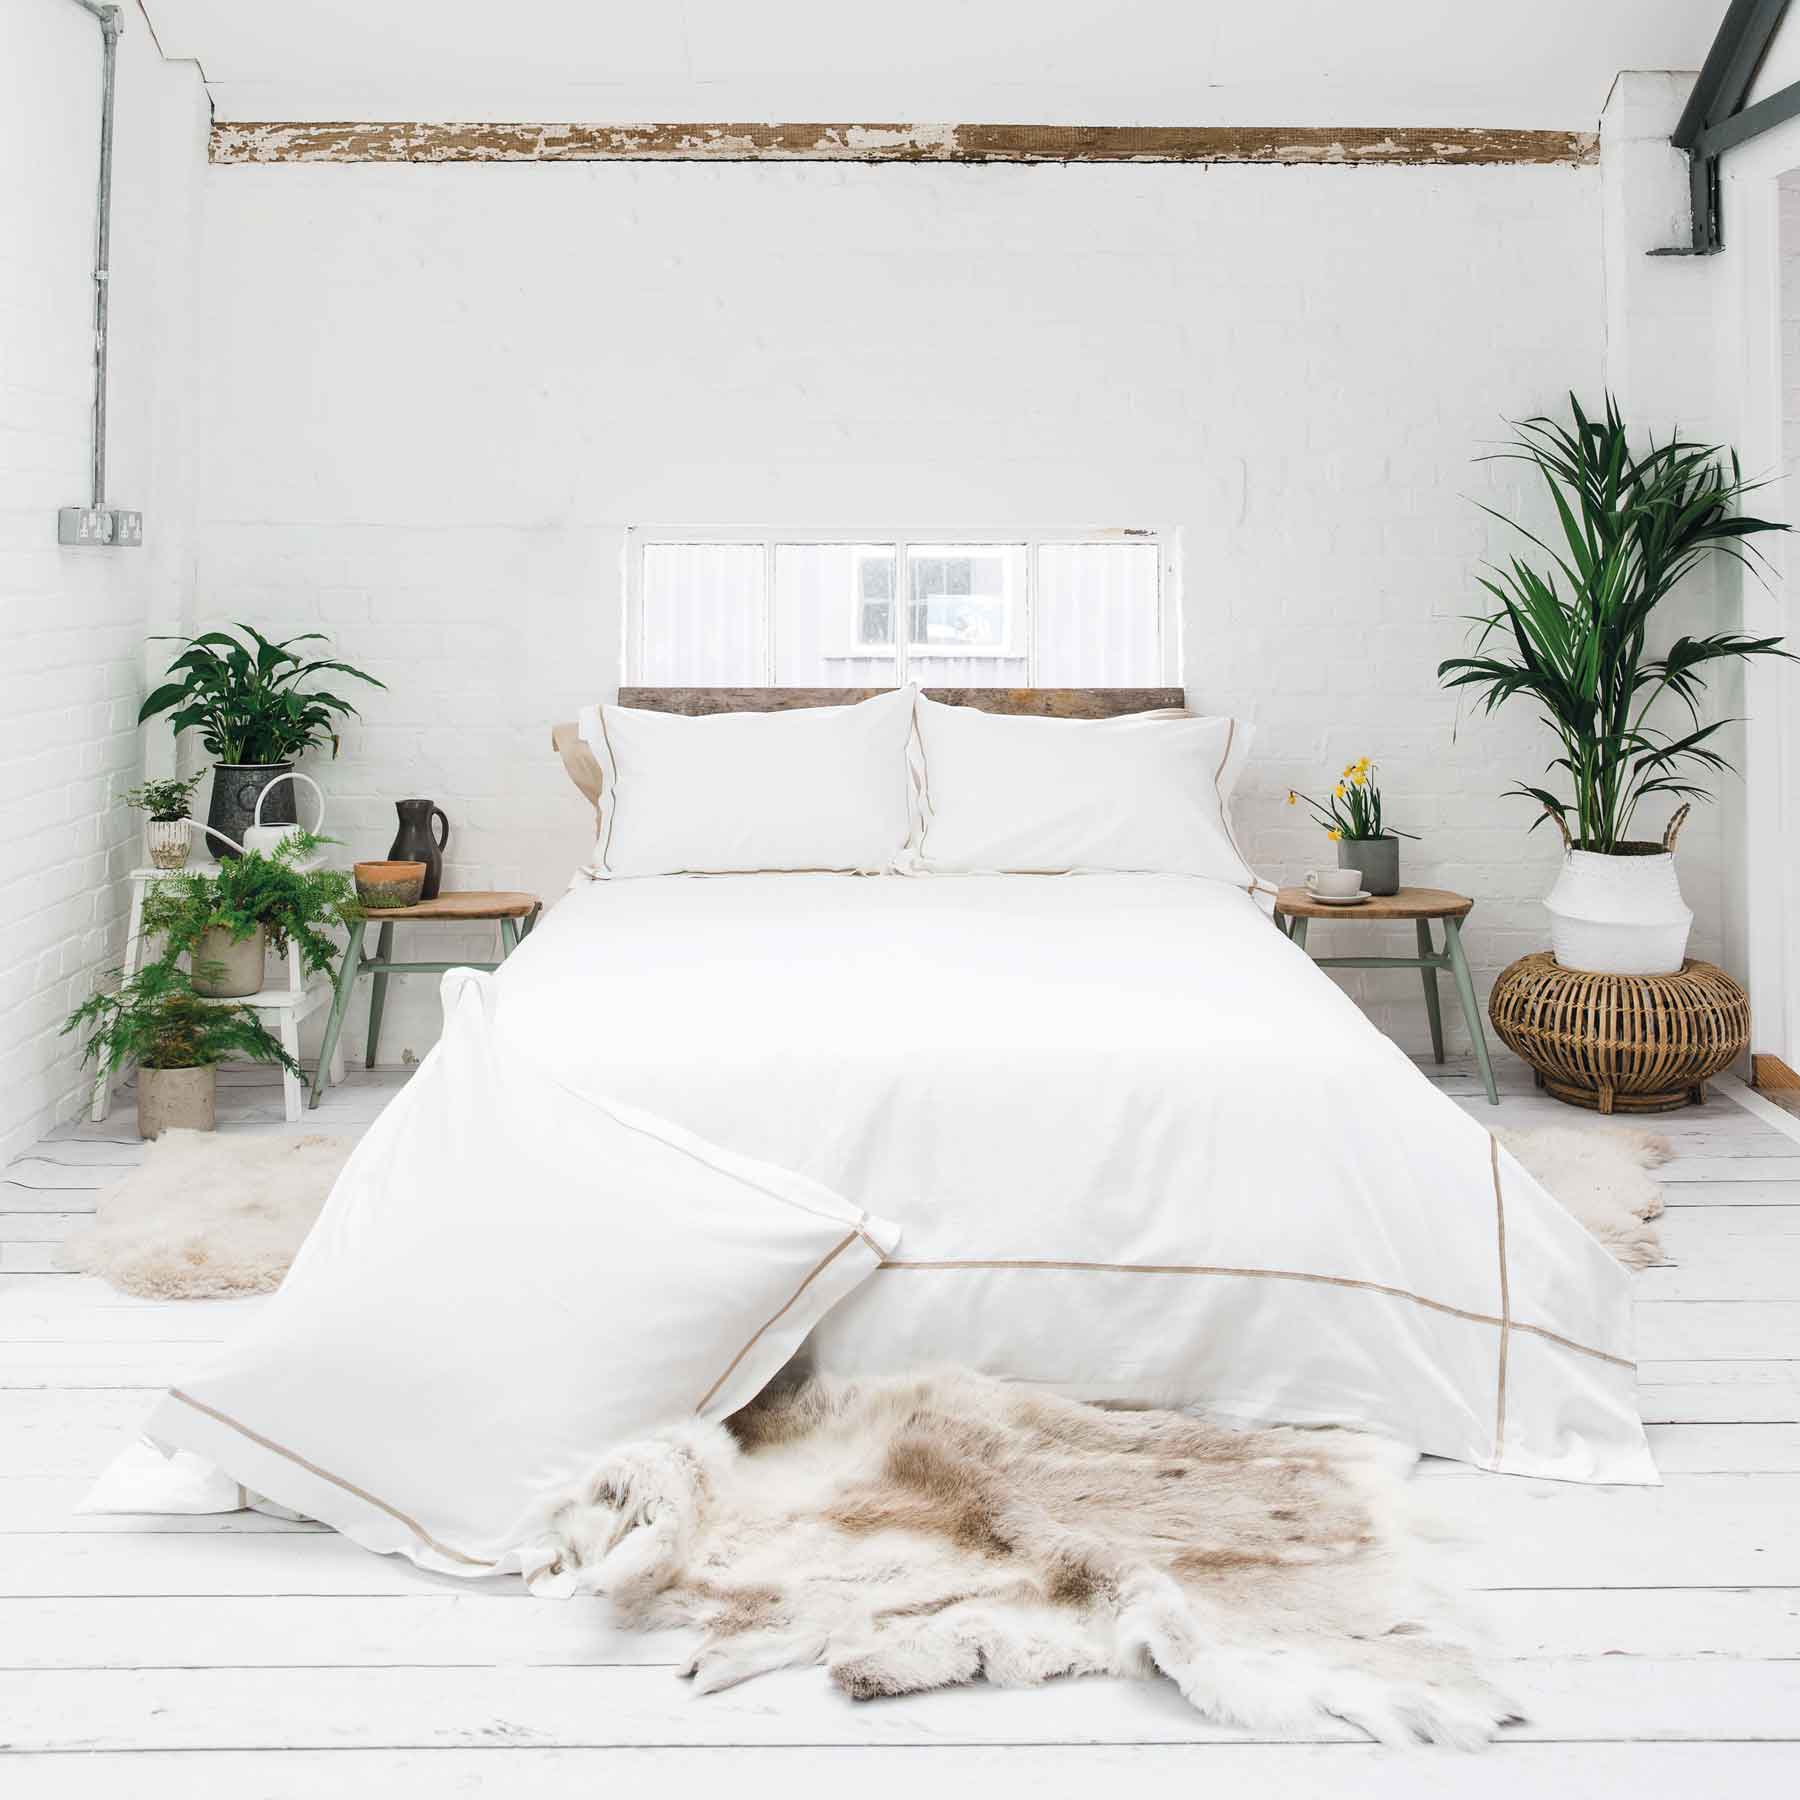 Bed linen by Beaumont & Brown